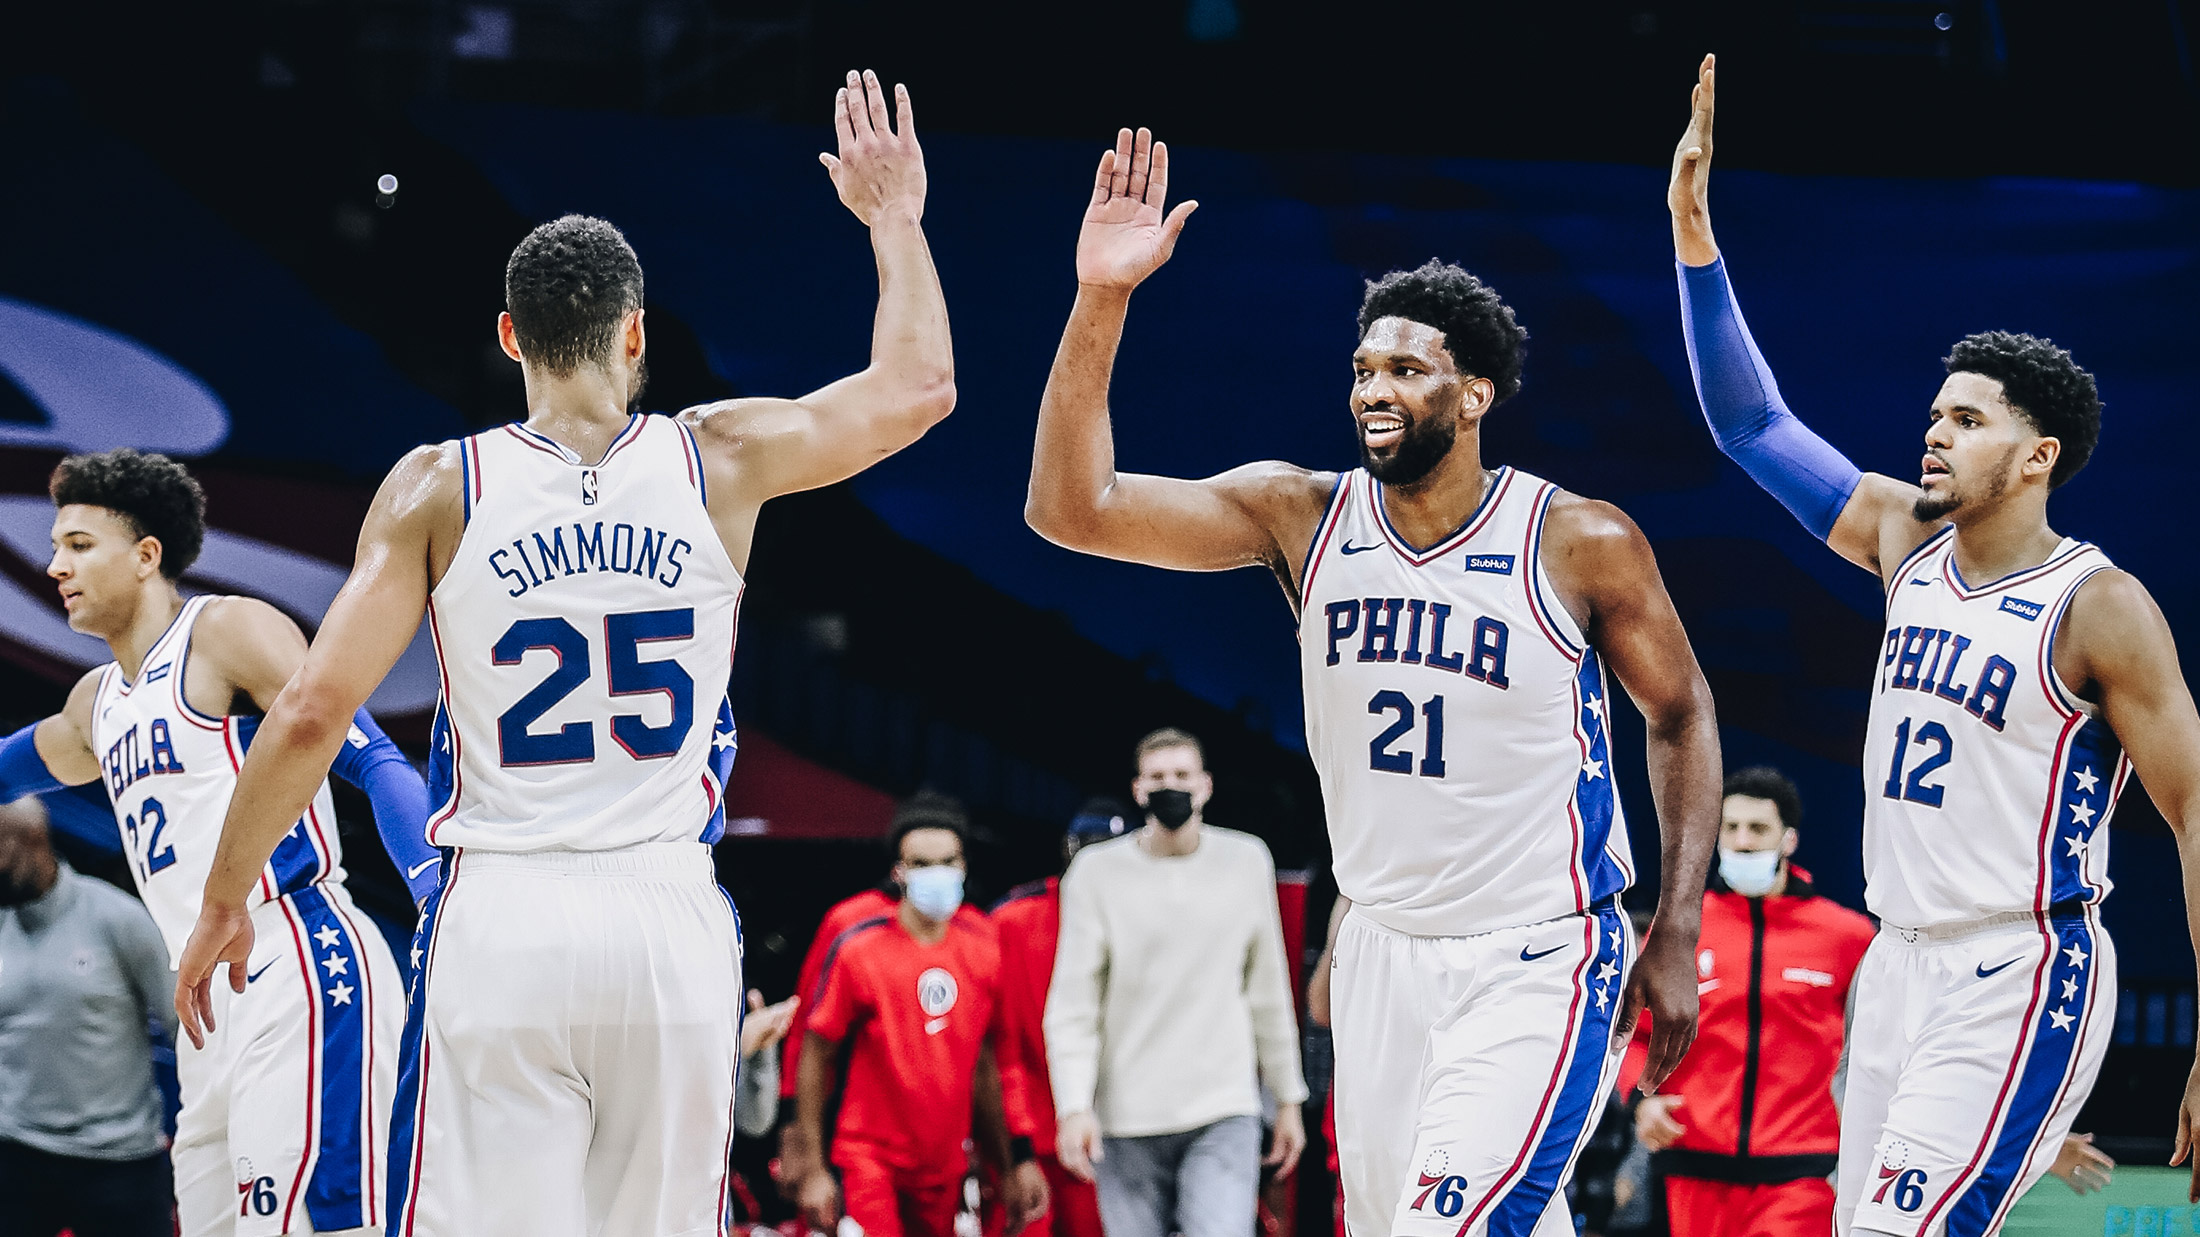 Philadelphia 76ers Rise to New Heights After James Harden's Exit Inside Their Winning Streak and Team Transformation